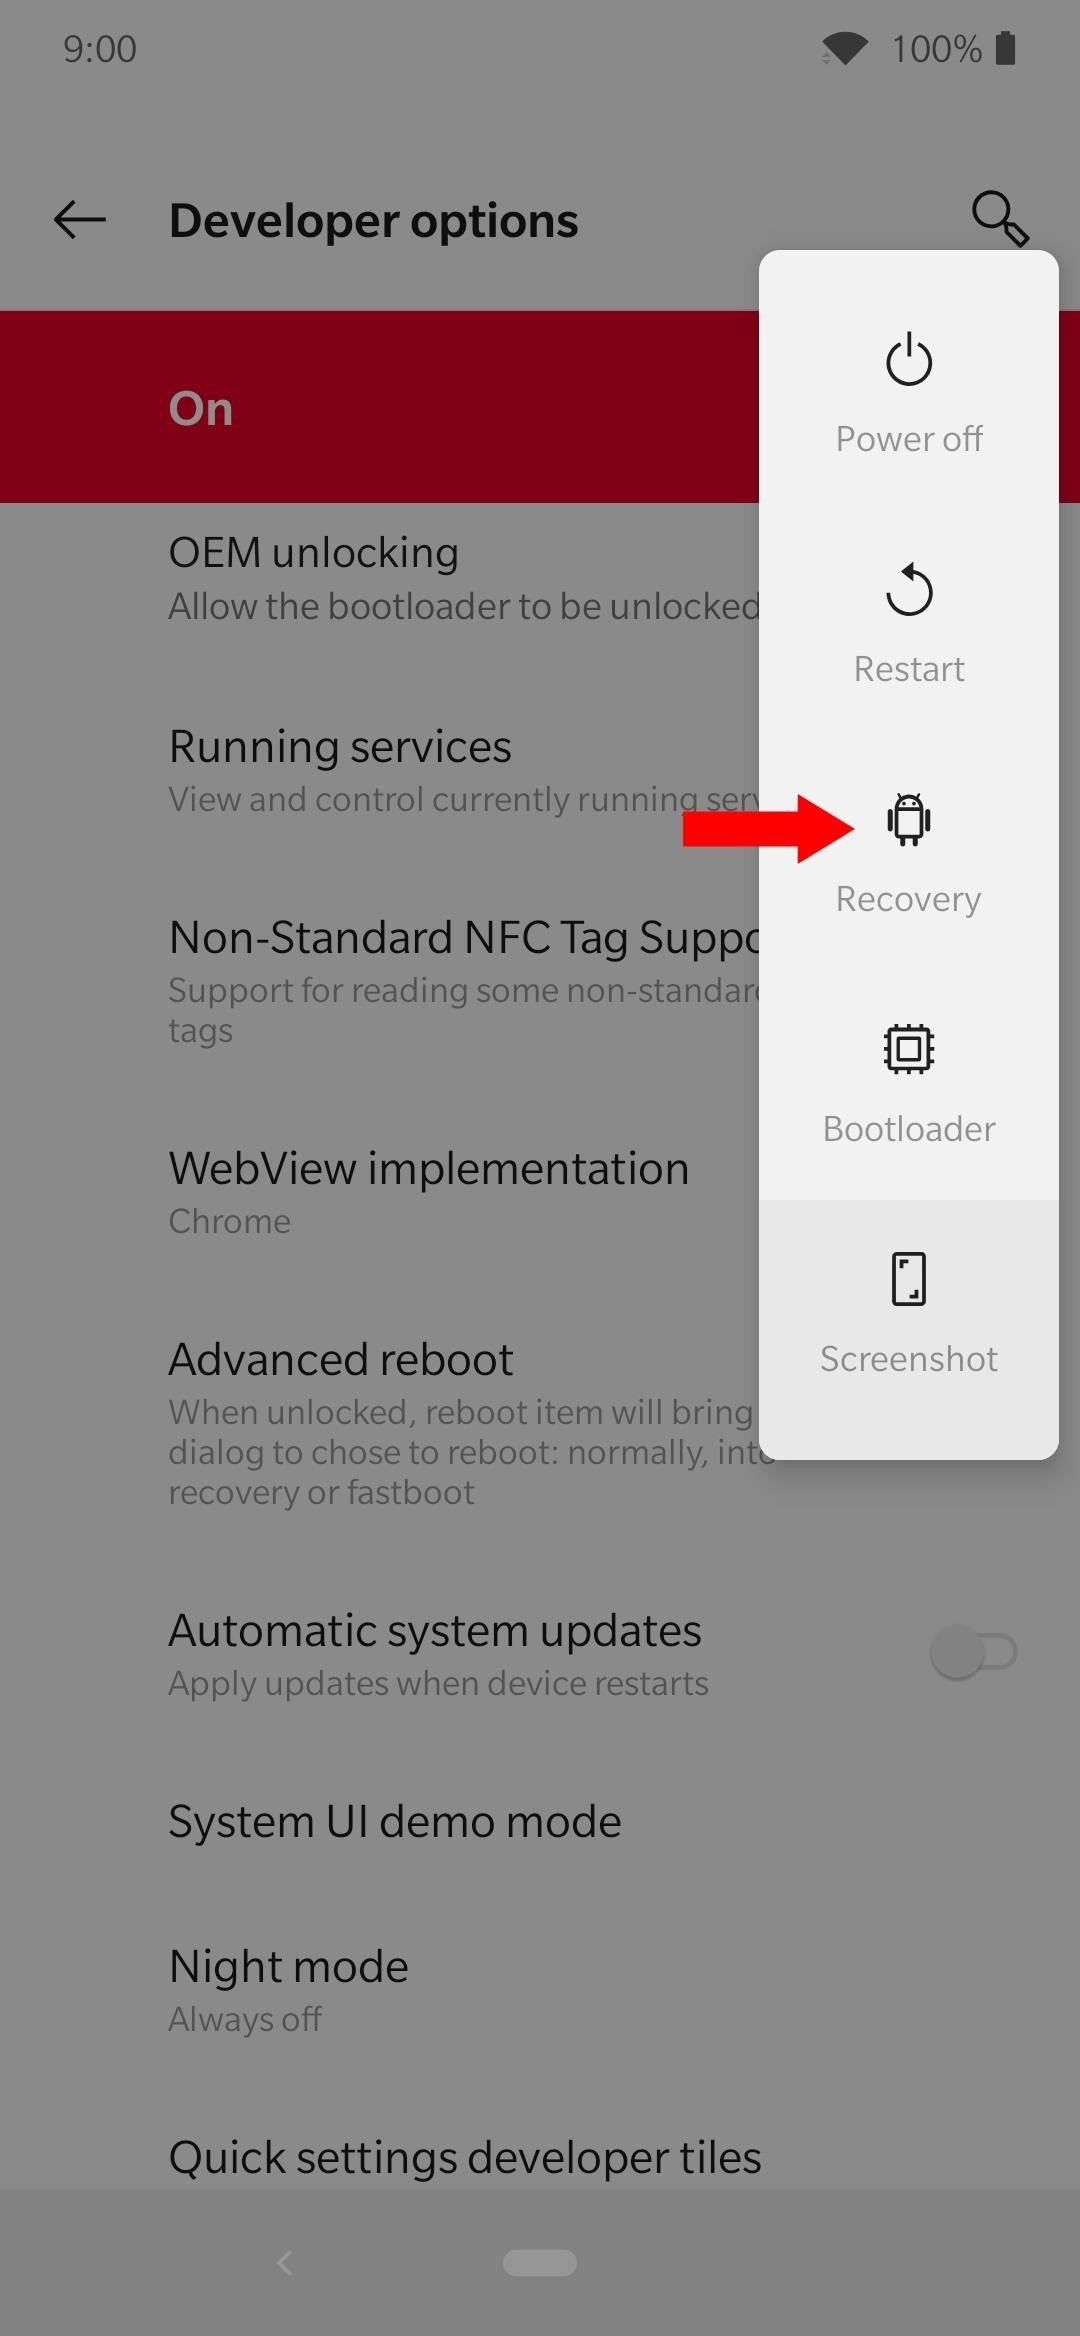 Update Your OnePlus 7 Pro Without Losing Root — No Computer Needed